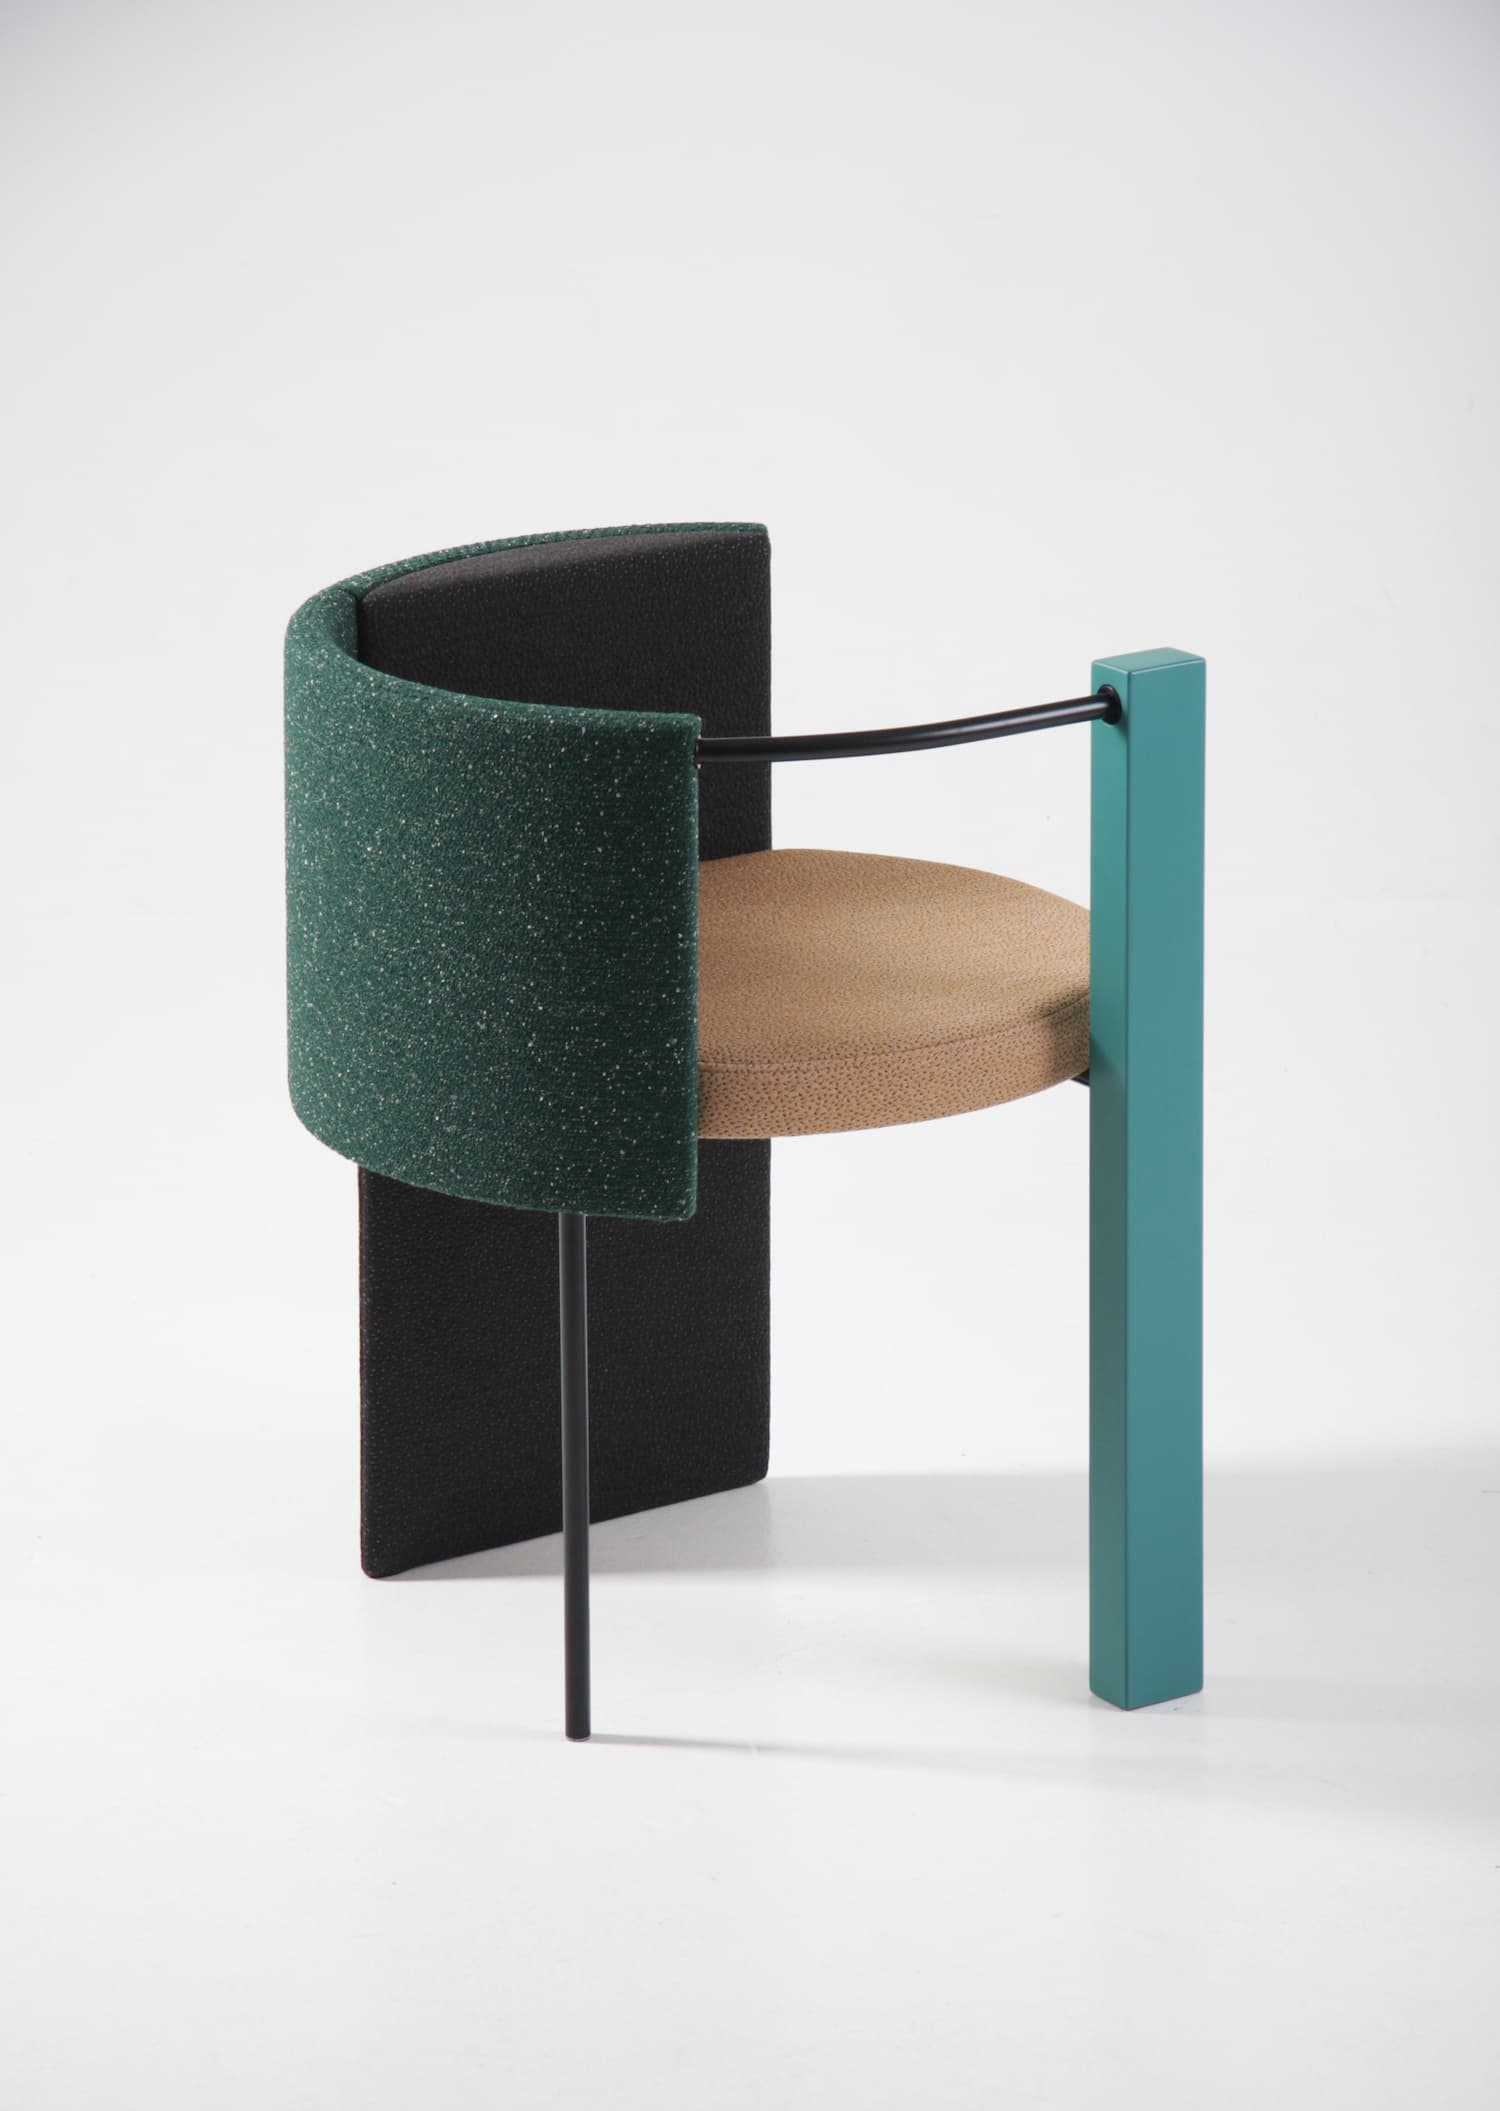 Apart chair in green edition